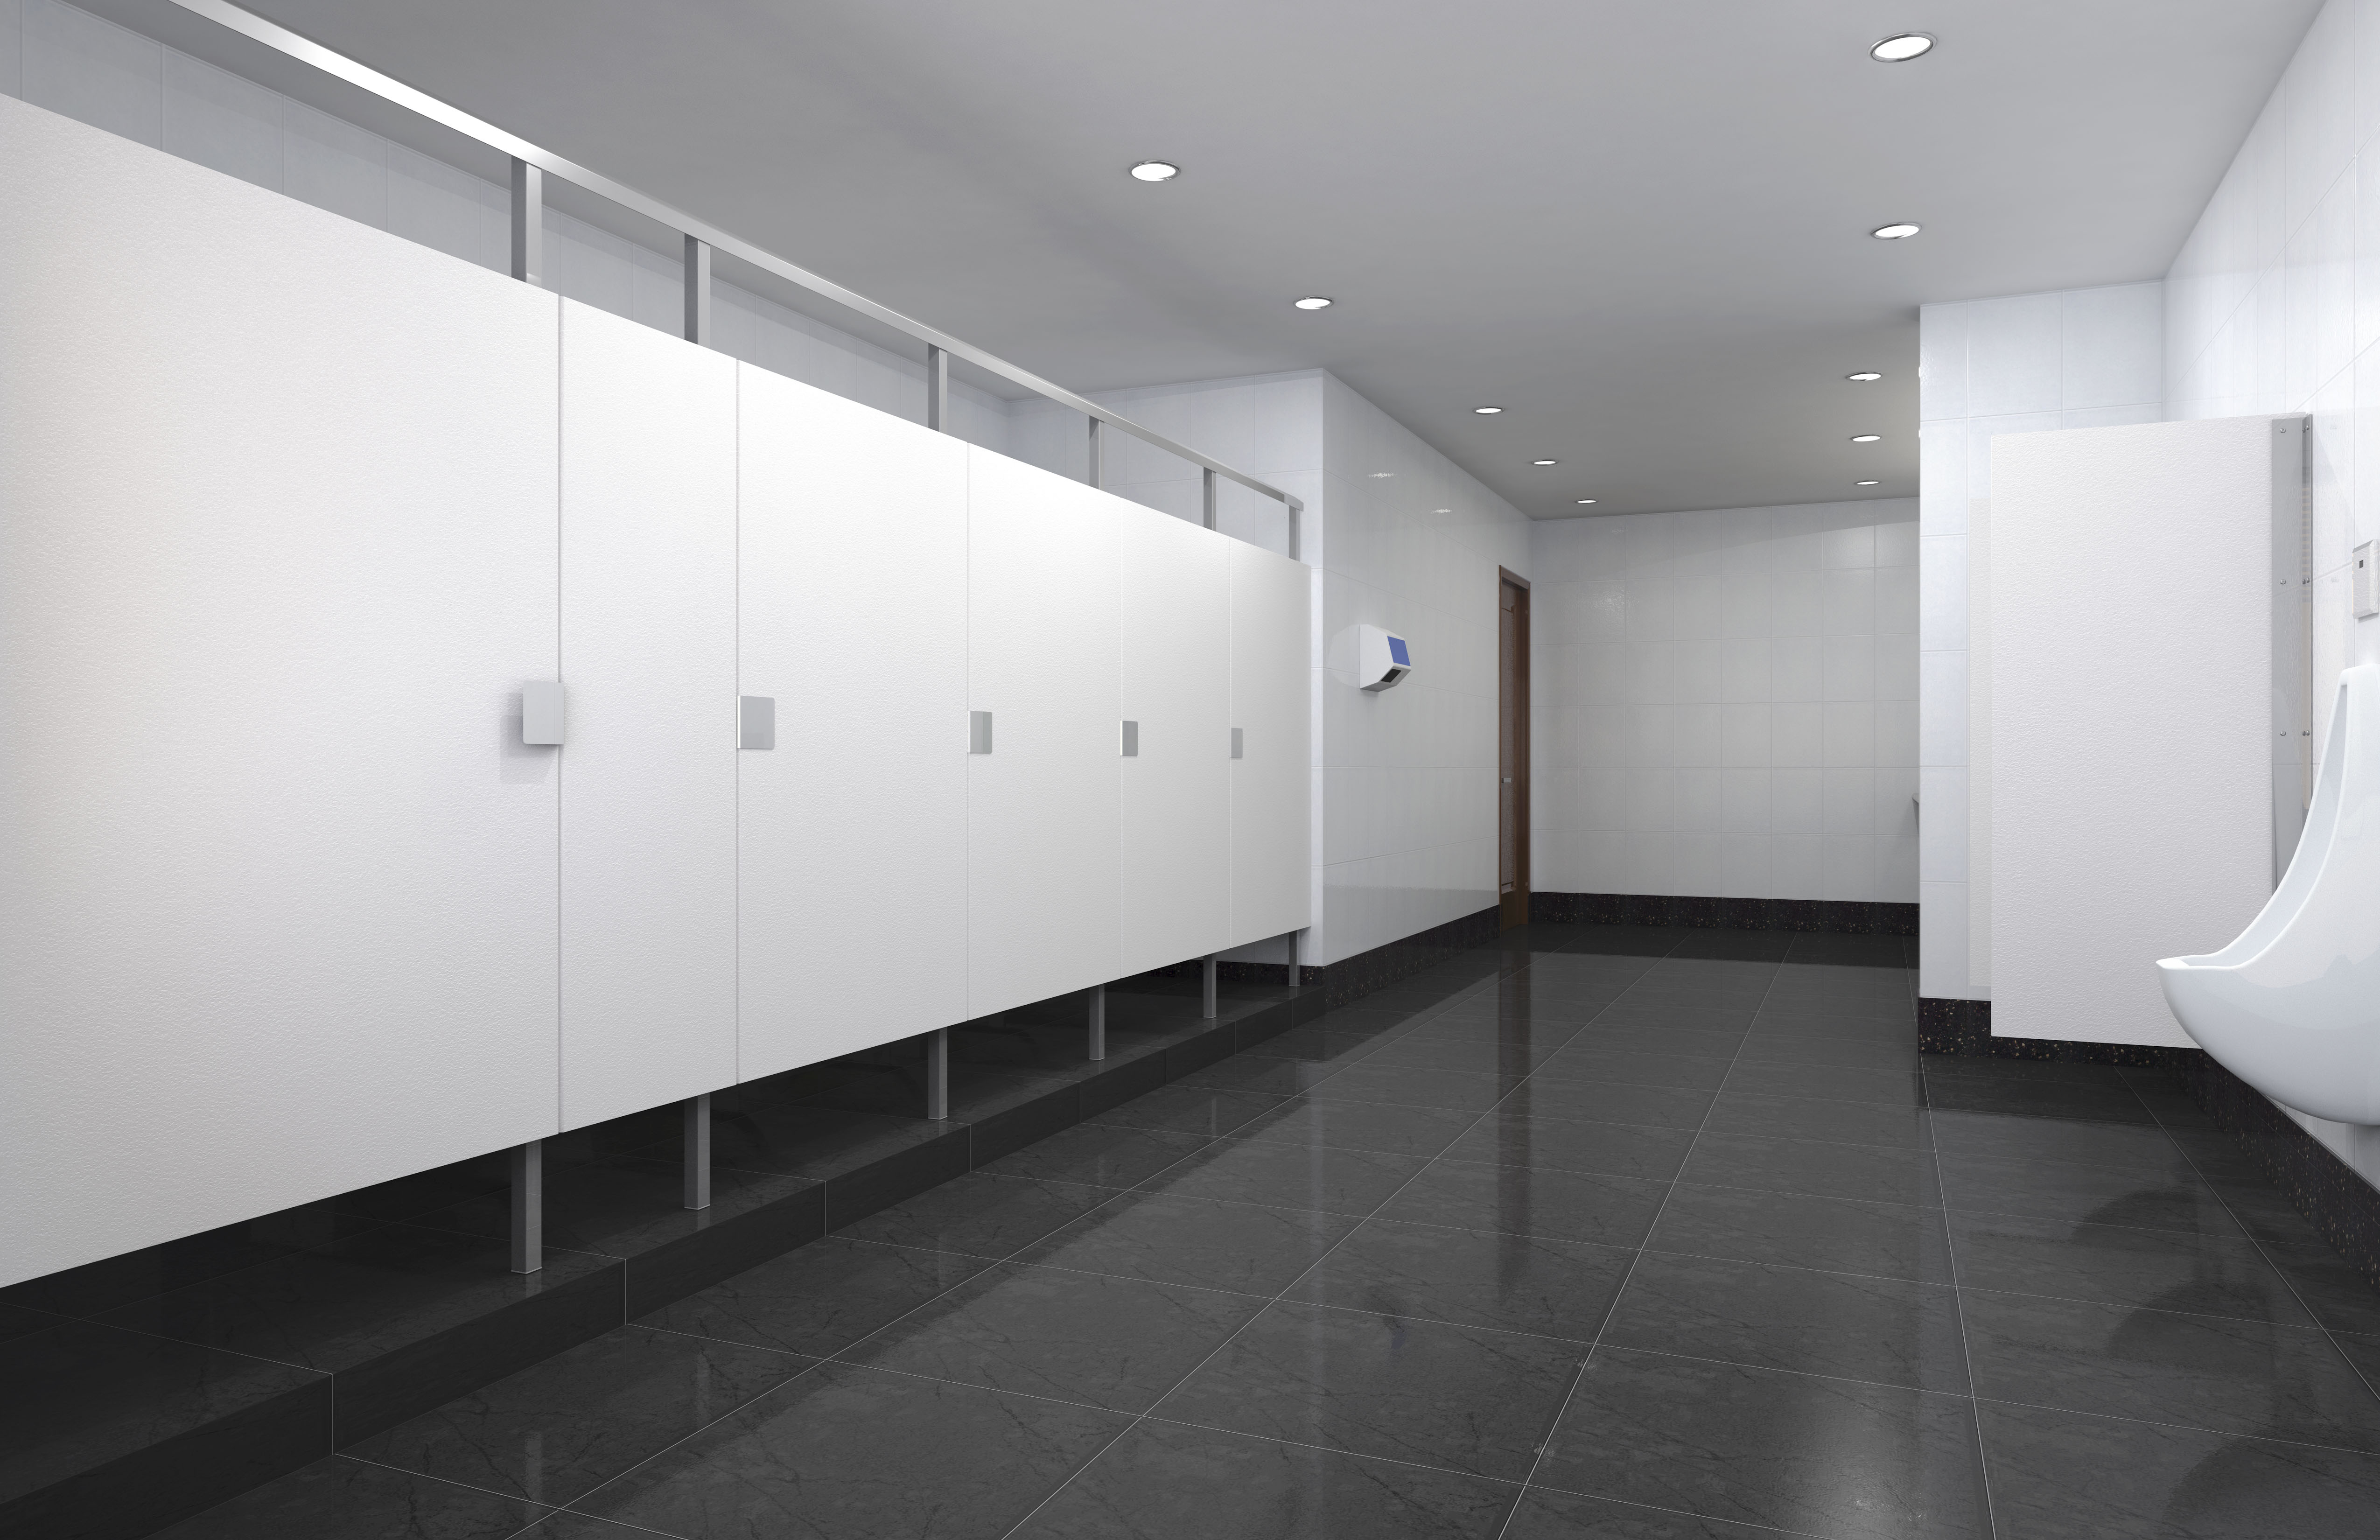 Scranton Products manufactures innovative HDPE bathroom partitions and lockers.